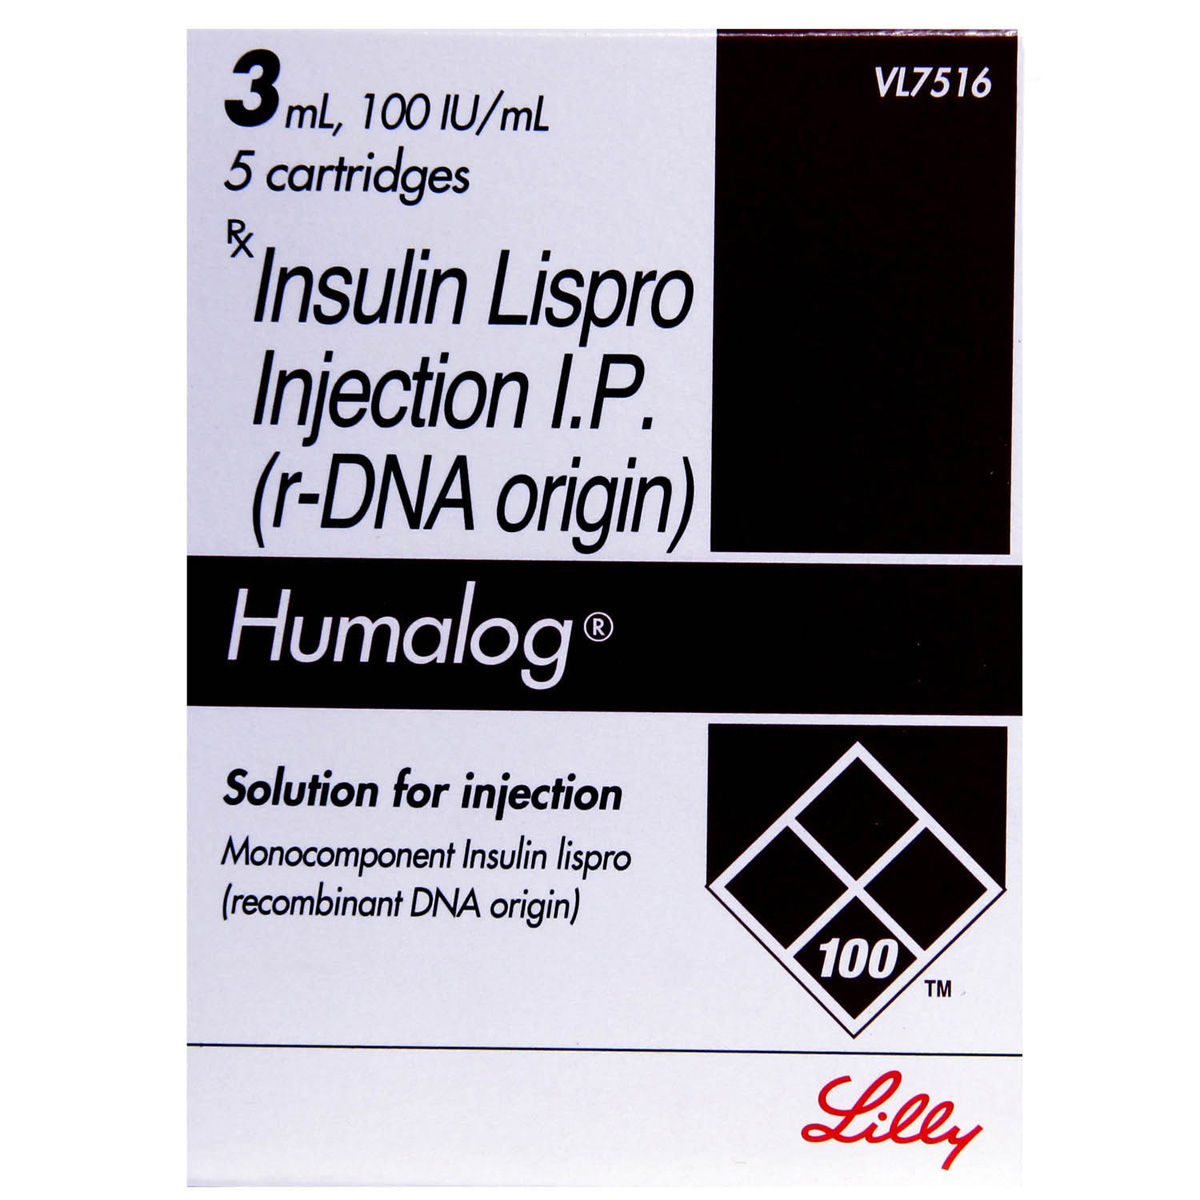 Buy Humalog 100IU/ml Solution for Injection 5 x 3 ml Online